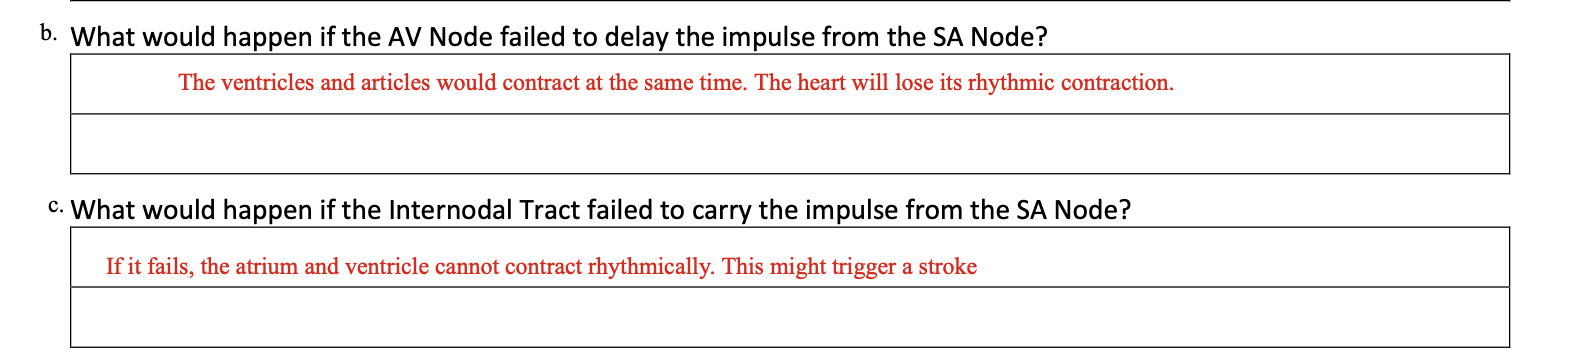 b. What would happen if the AV Node failed to delay the impulse from the SA Node? The ventricles and articles would contract